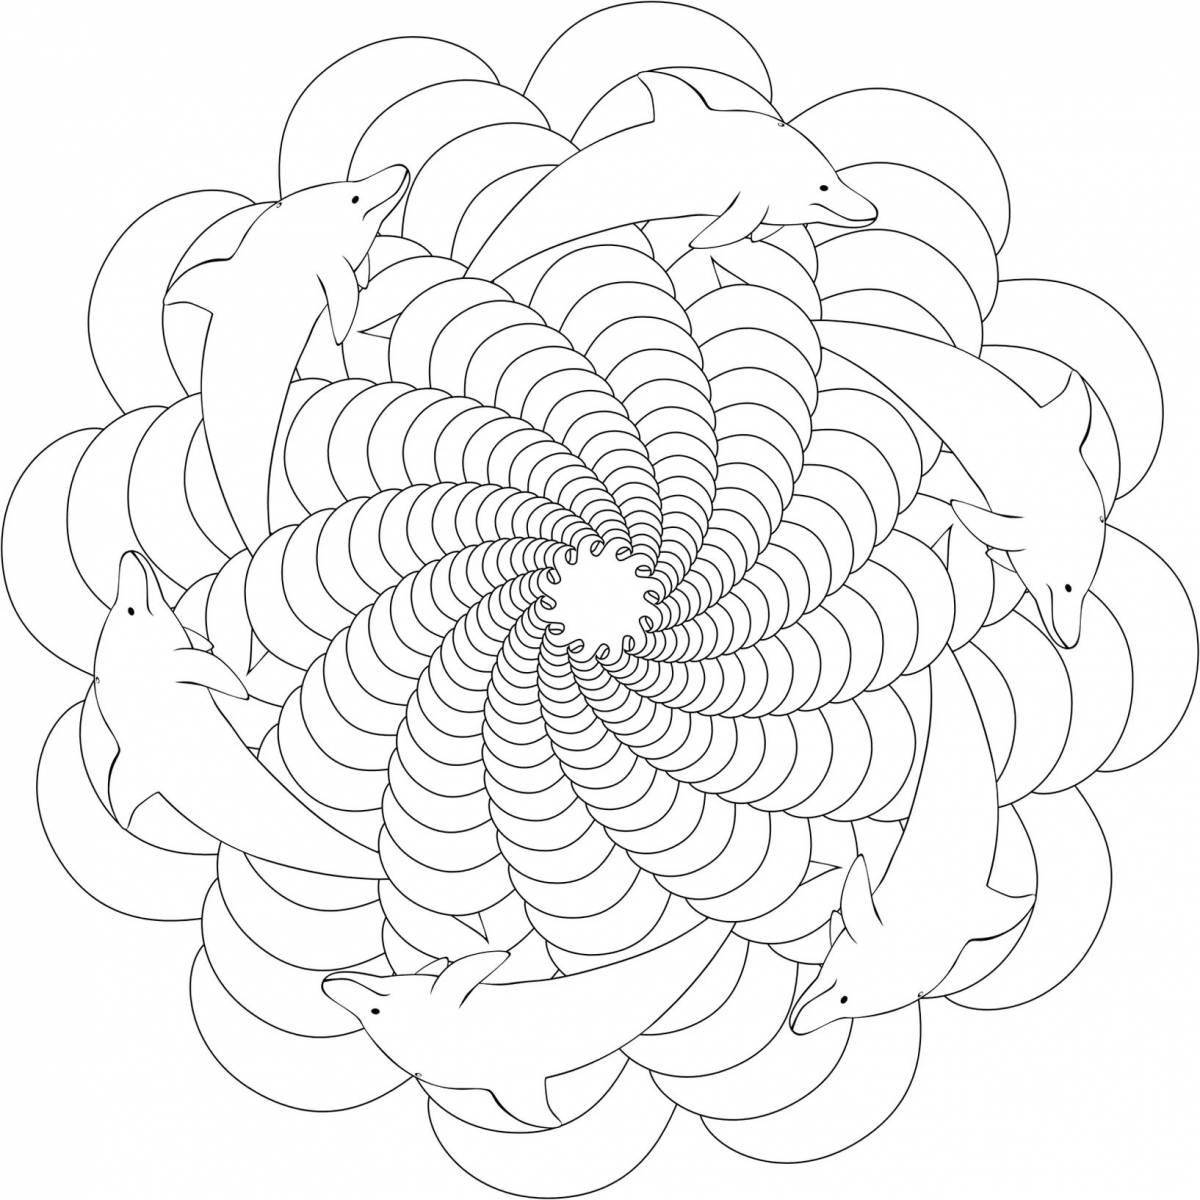 Zany spiral coloring page